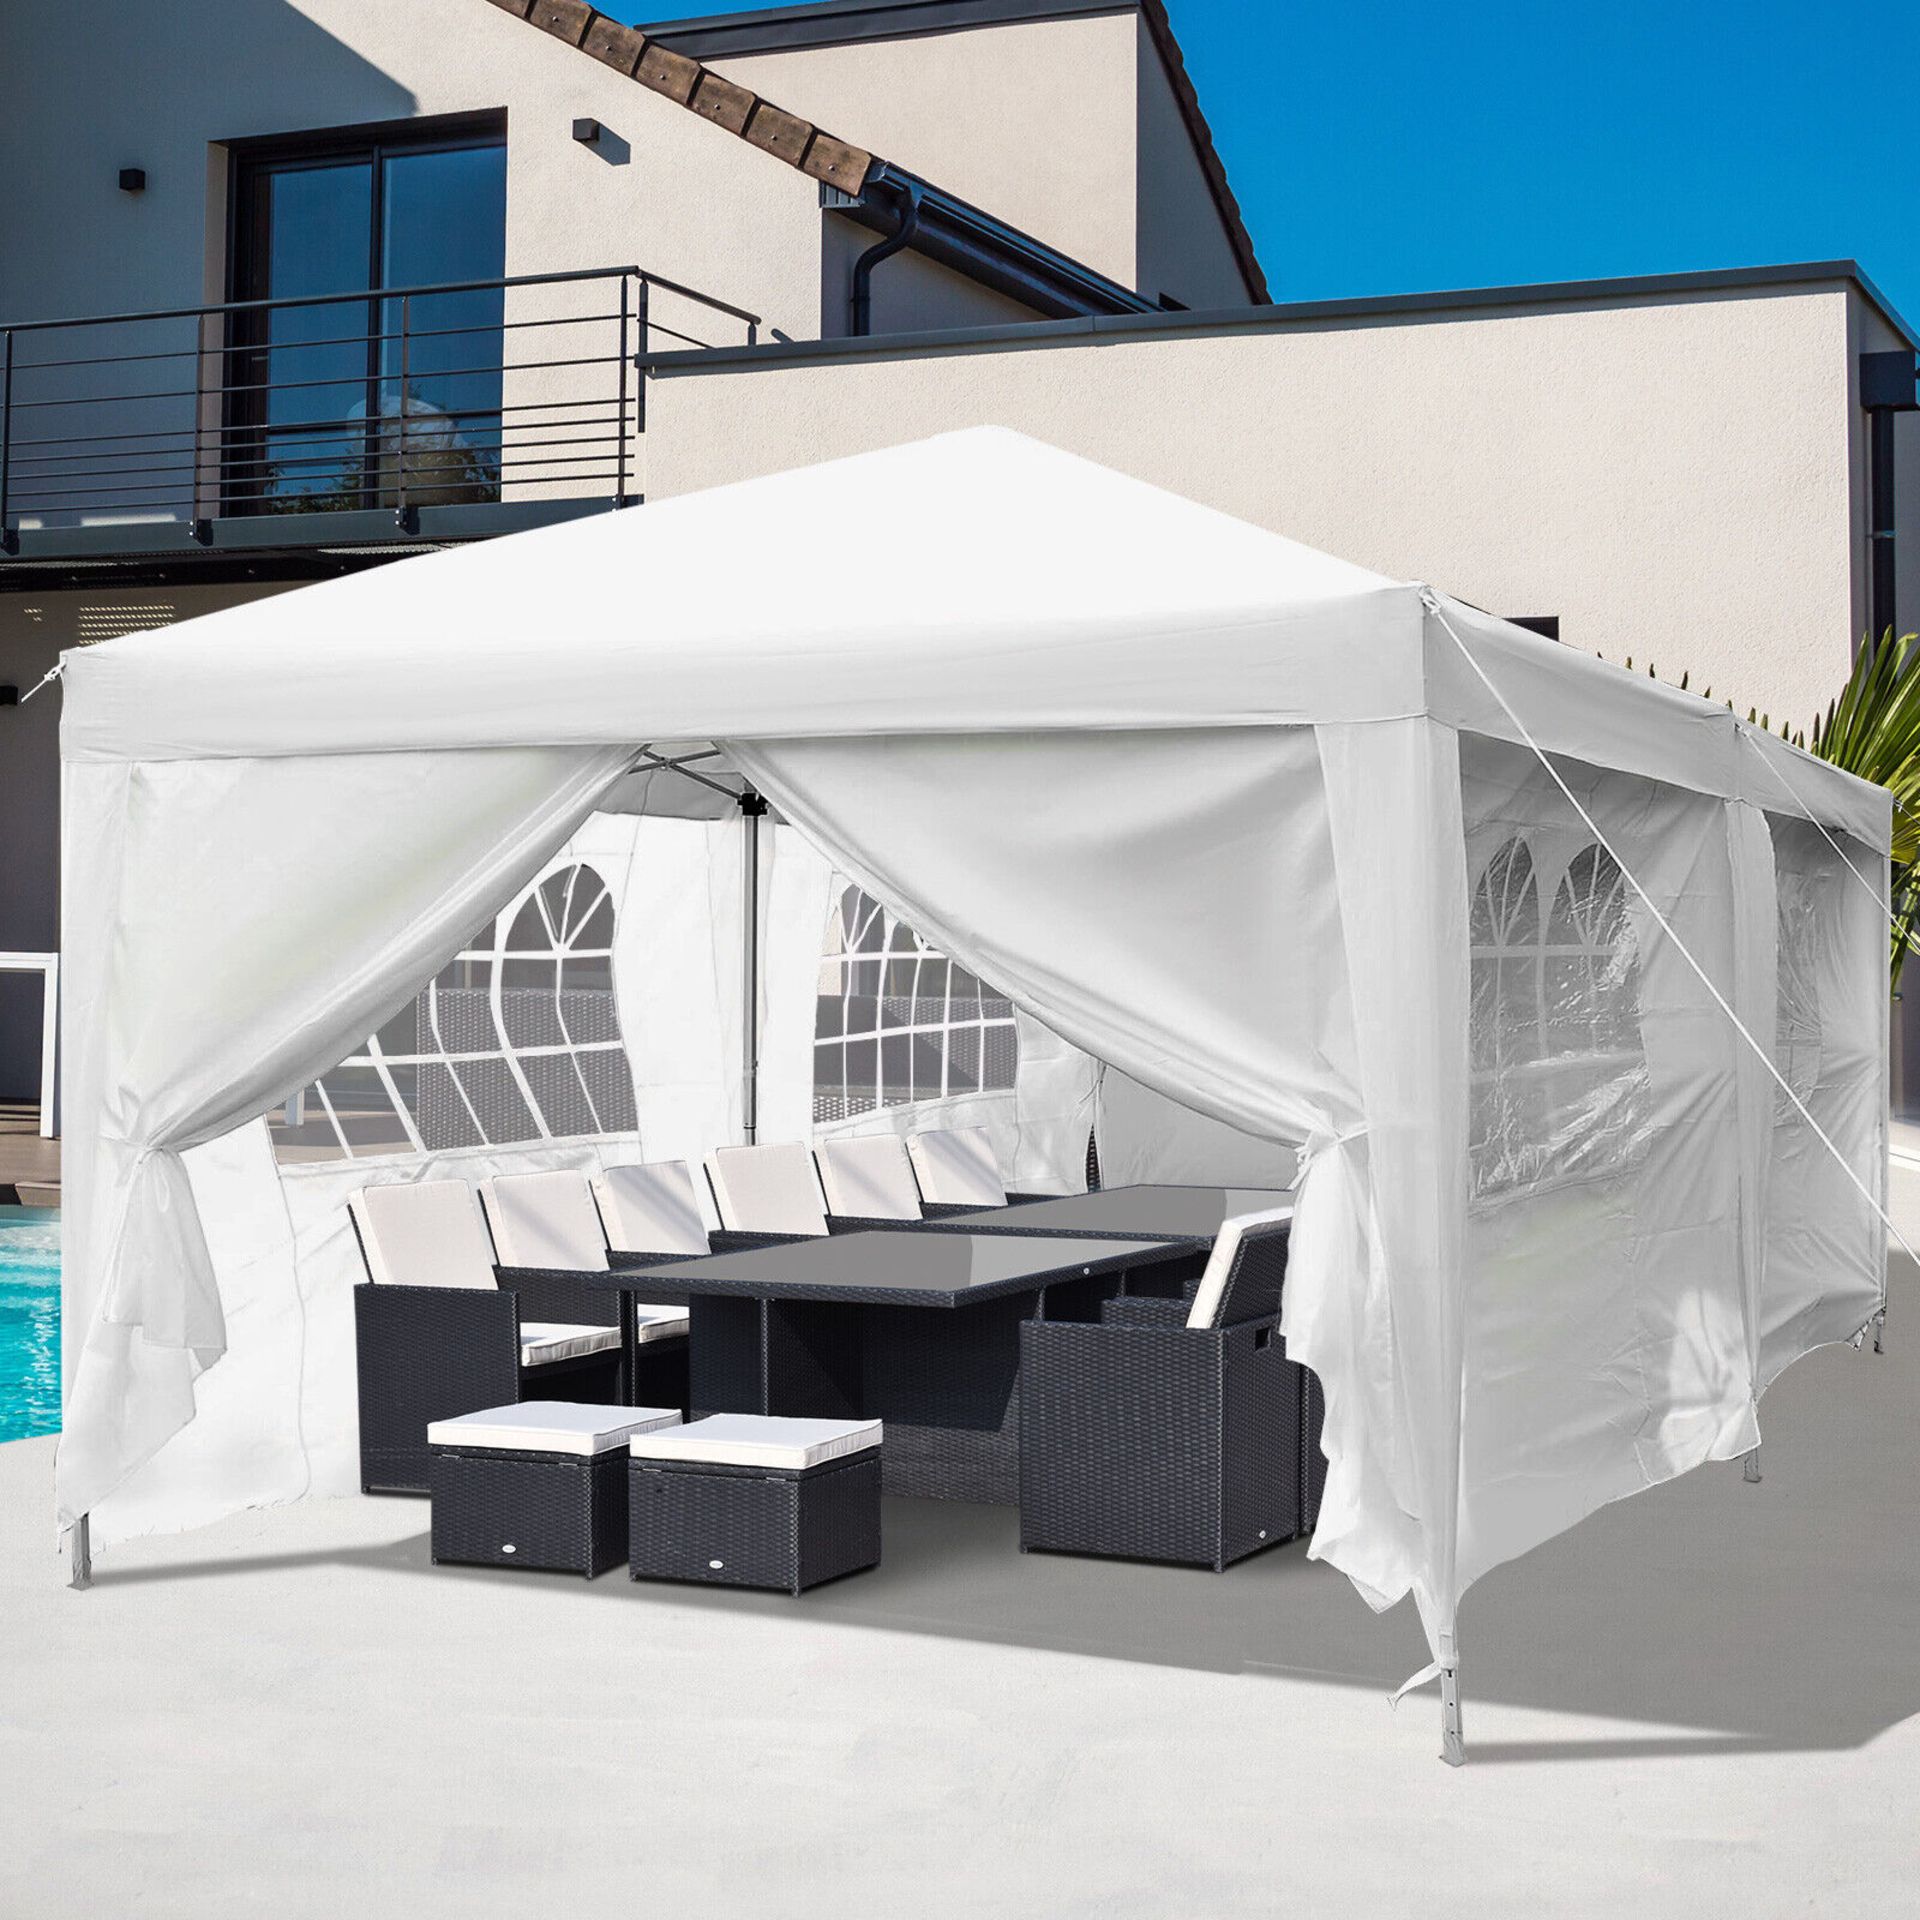 1 X TESCO OUTDOOR PARTY GAZEBO 3M X 6M IN ORIGINAL BOX - STOCK IMAGE FOR INDICATION OF SIZE ONLY